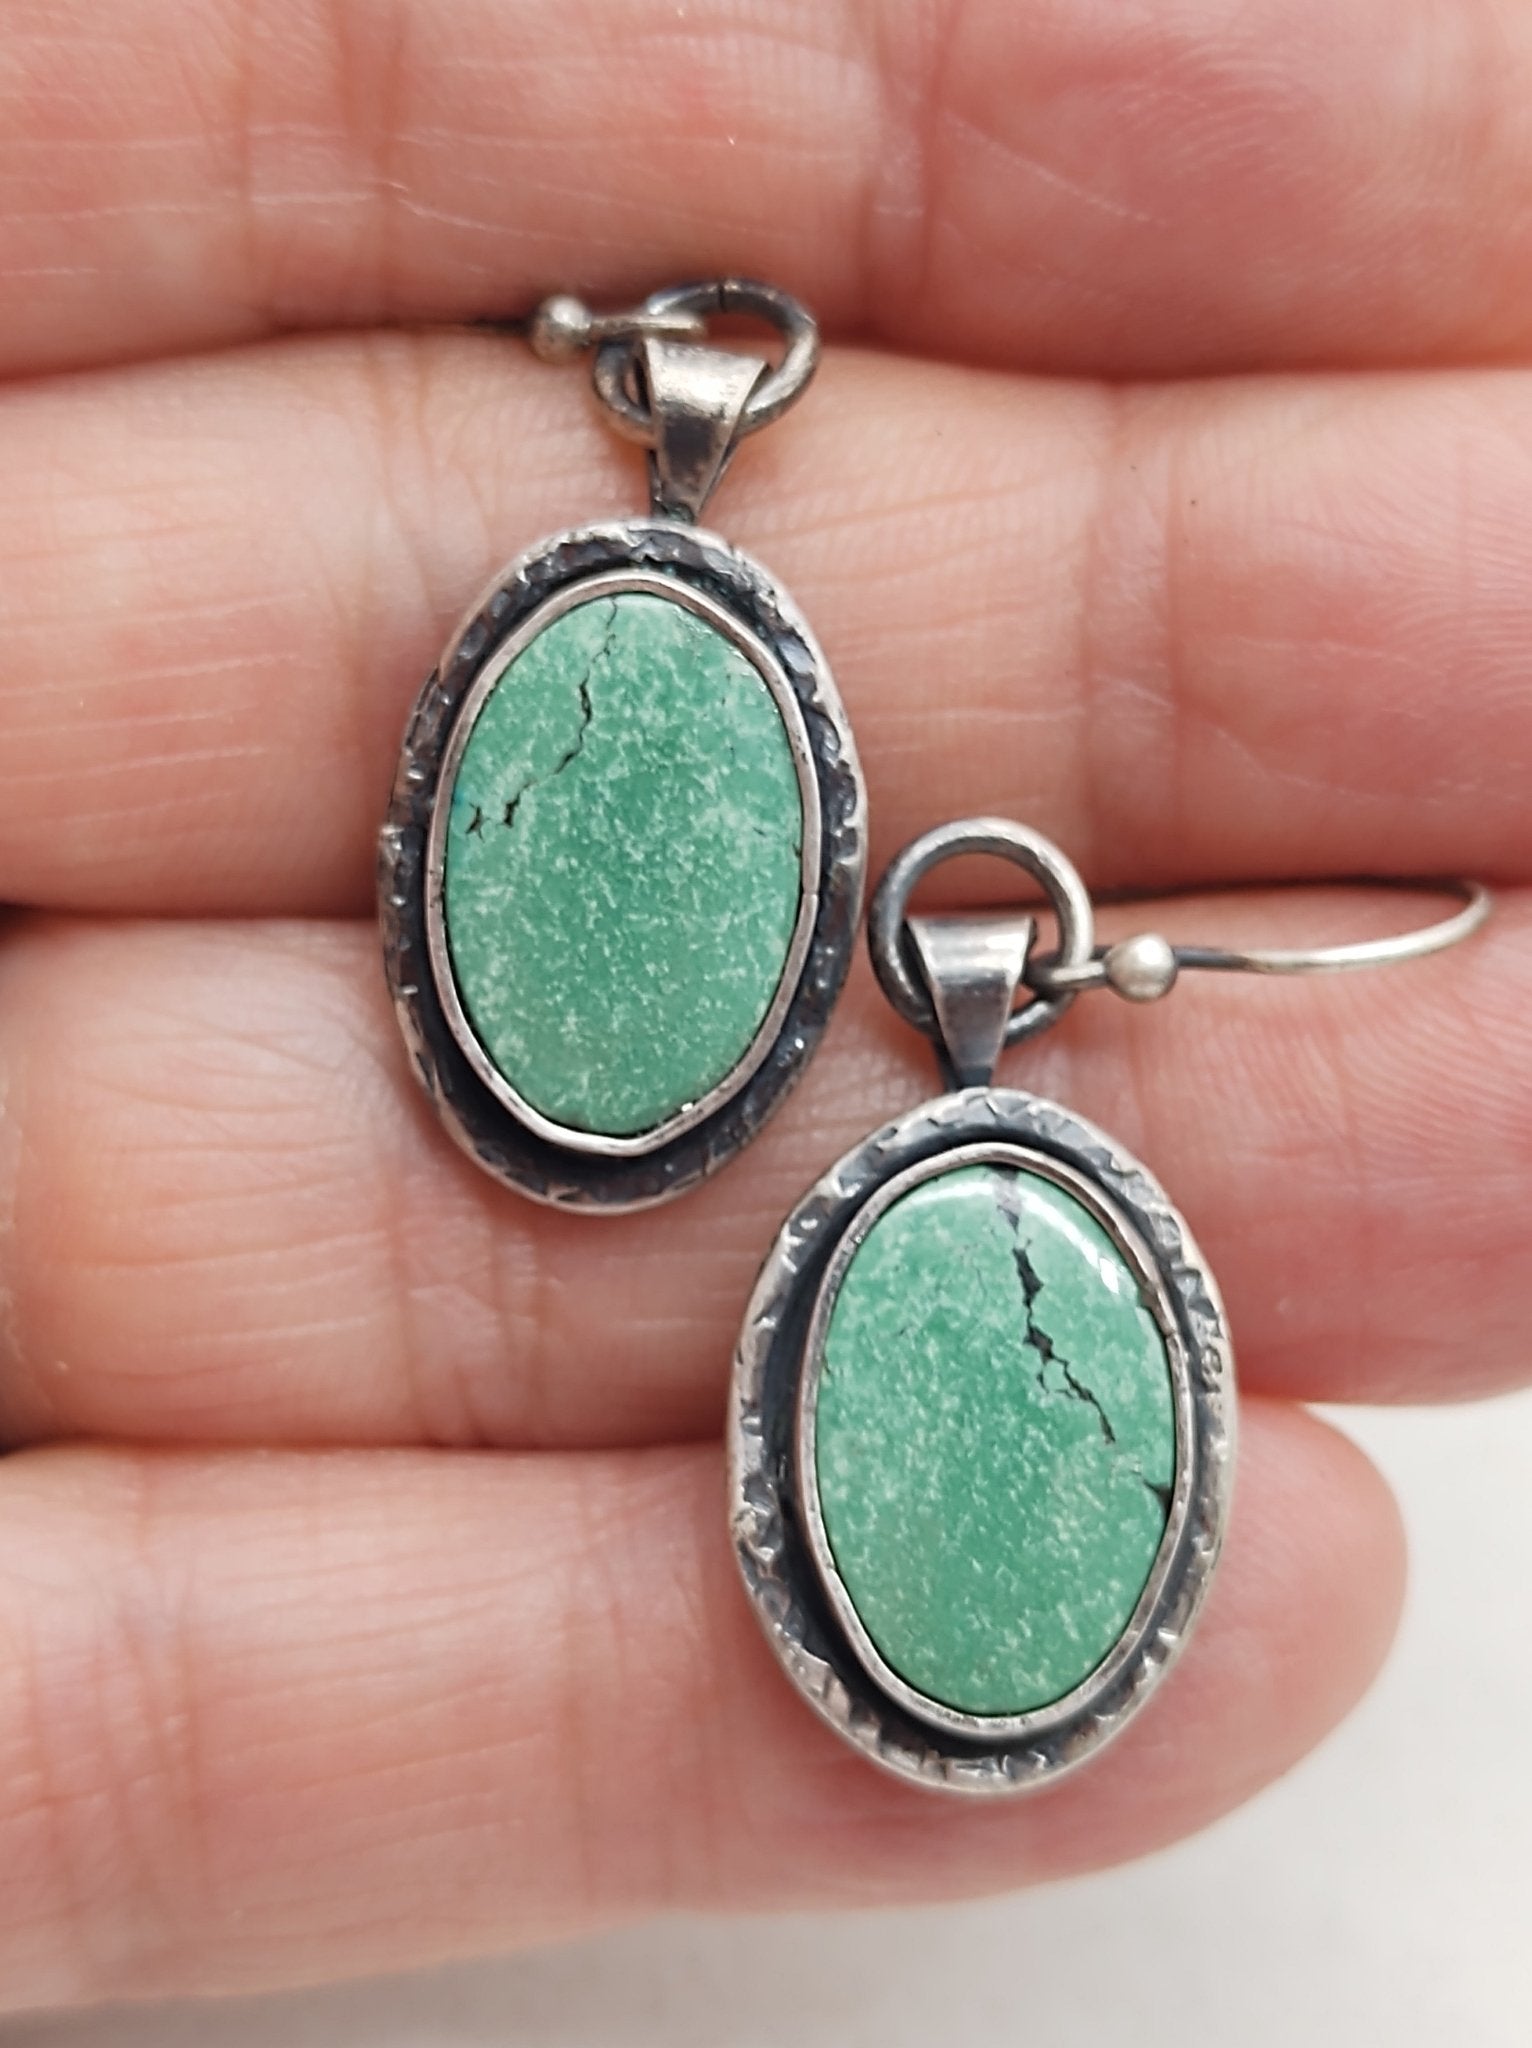 Turquoise Silver Dangle Earrings with American Turquoise Earrings by Folks On The Edge - Folks On The Edge